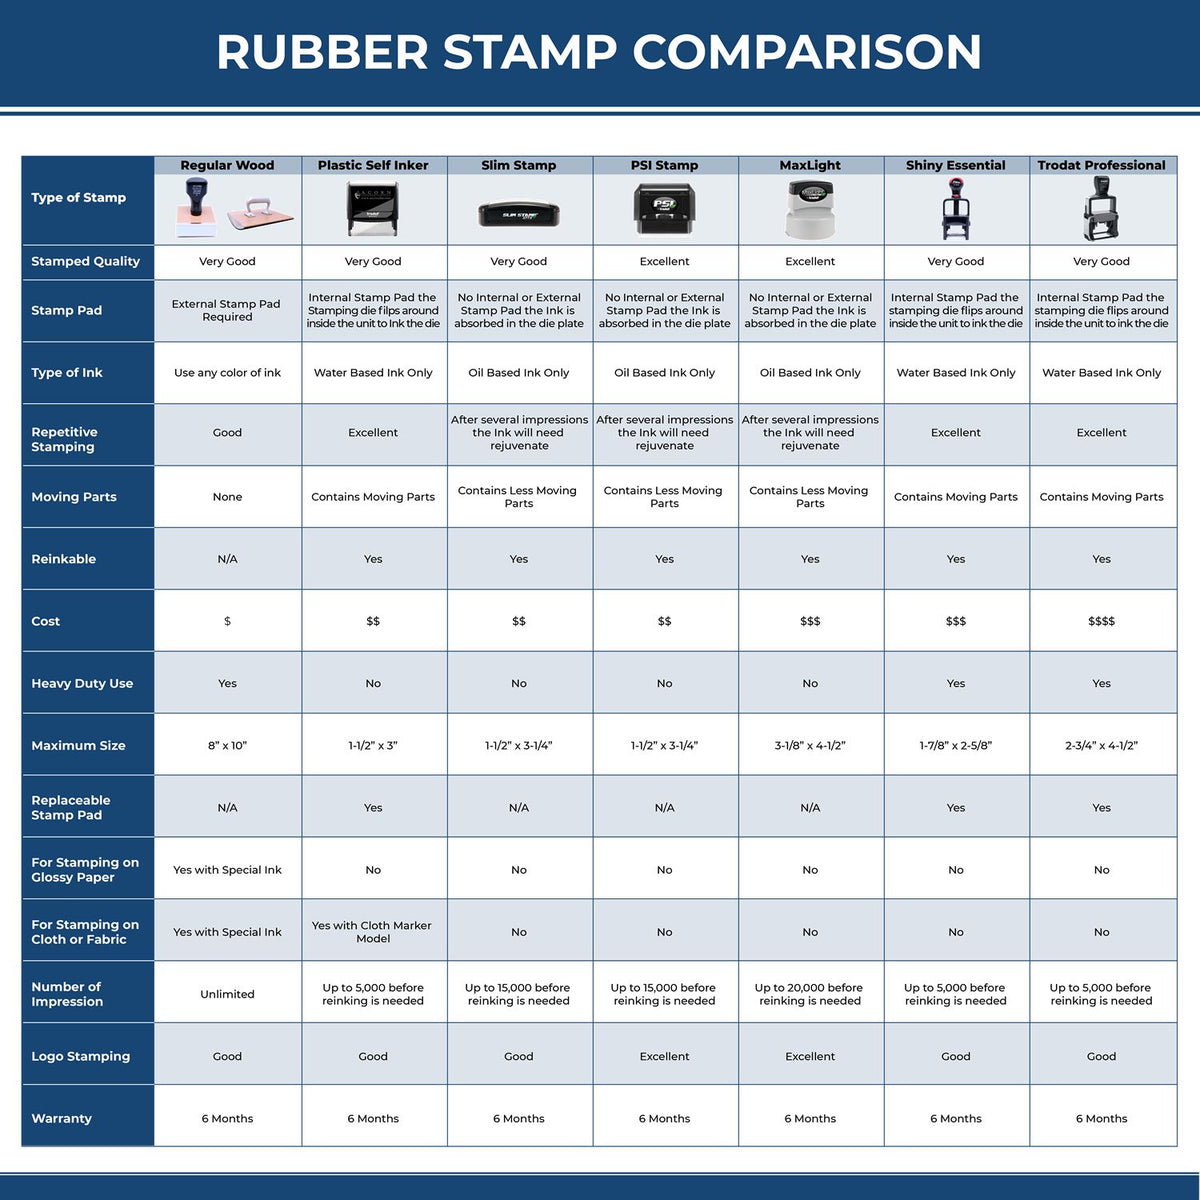 Large Strikeout Rubber Stamp 5579R Rubber Stamp Comparison